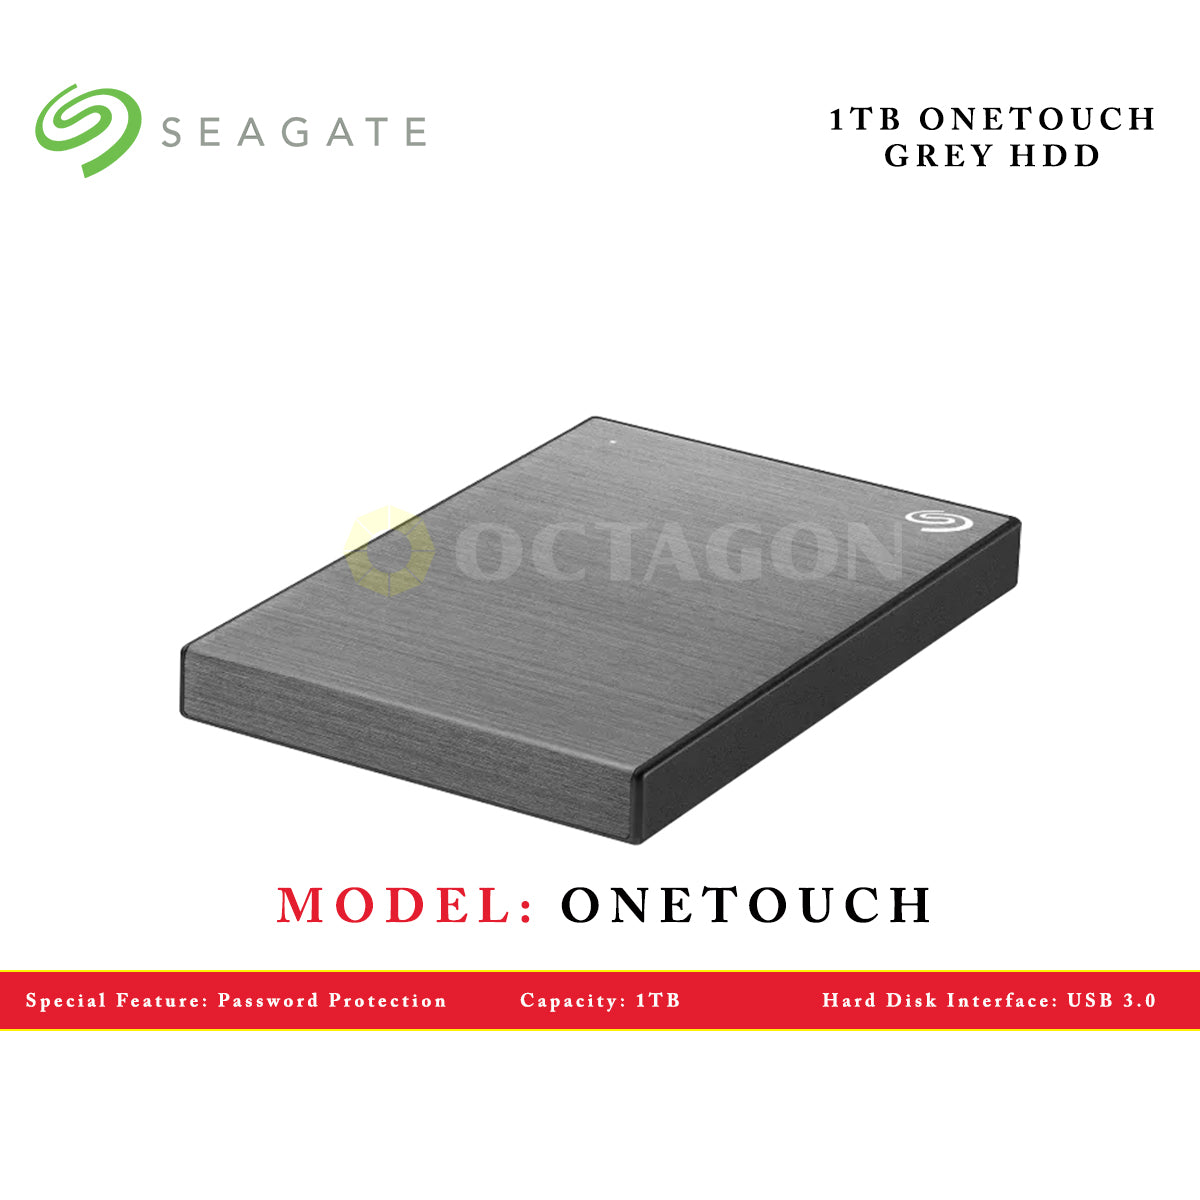 SEAGATE 1TB ONETOUCH HDD W/ PW